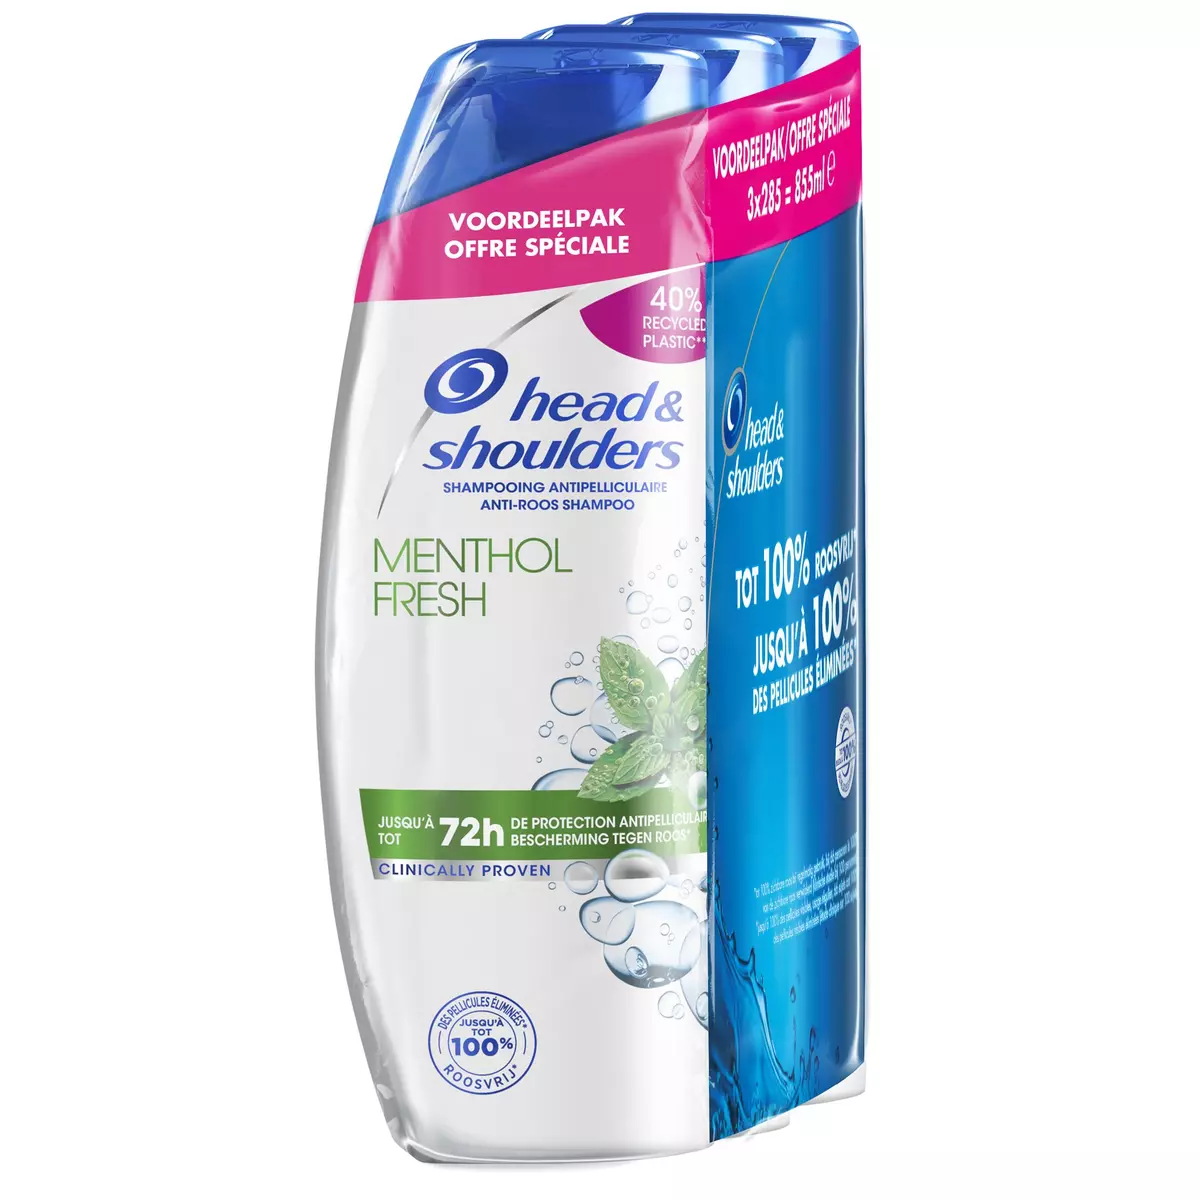 HEAD & SHOULDERS Menthol Fresh Shampoing antipelliculaire 3x285ml